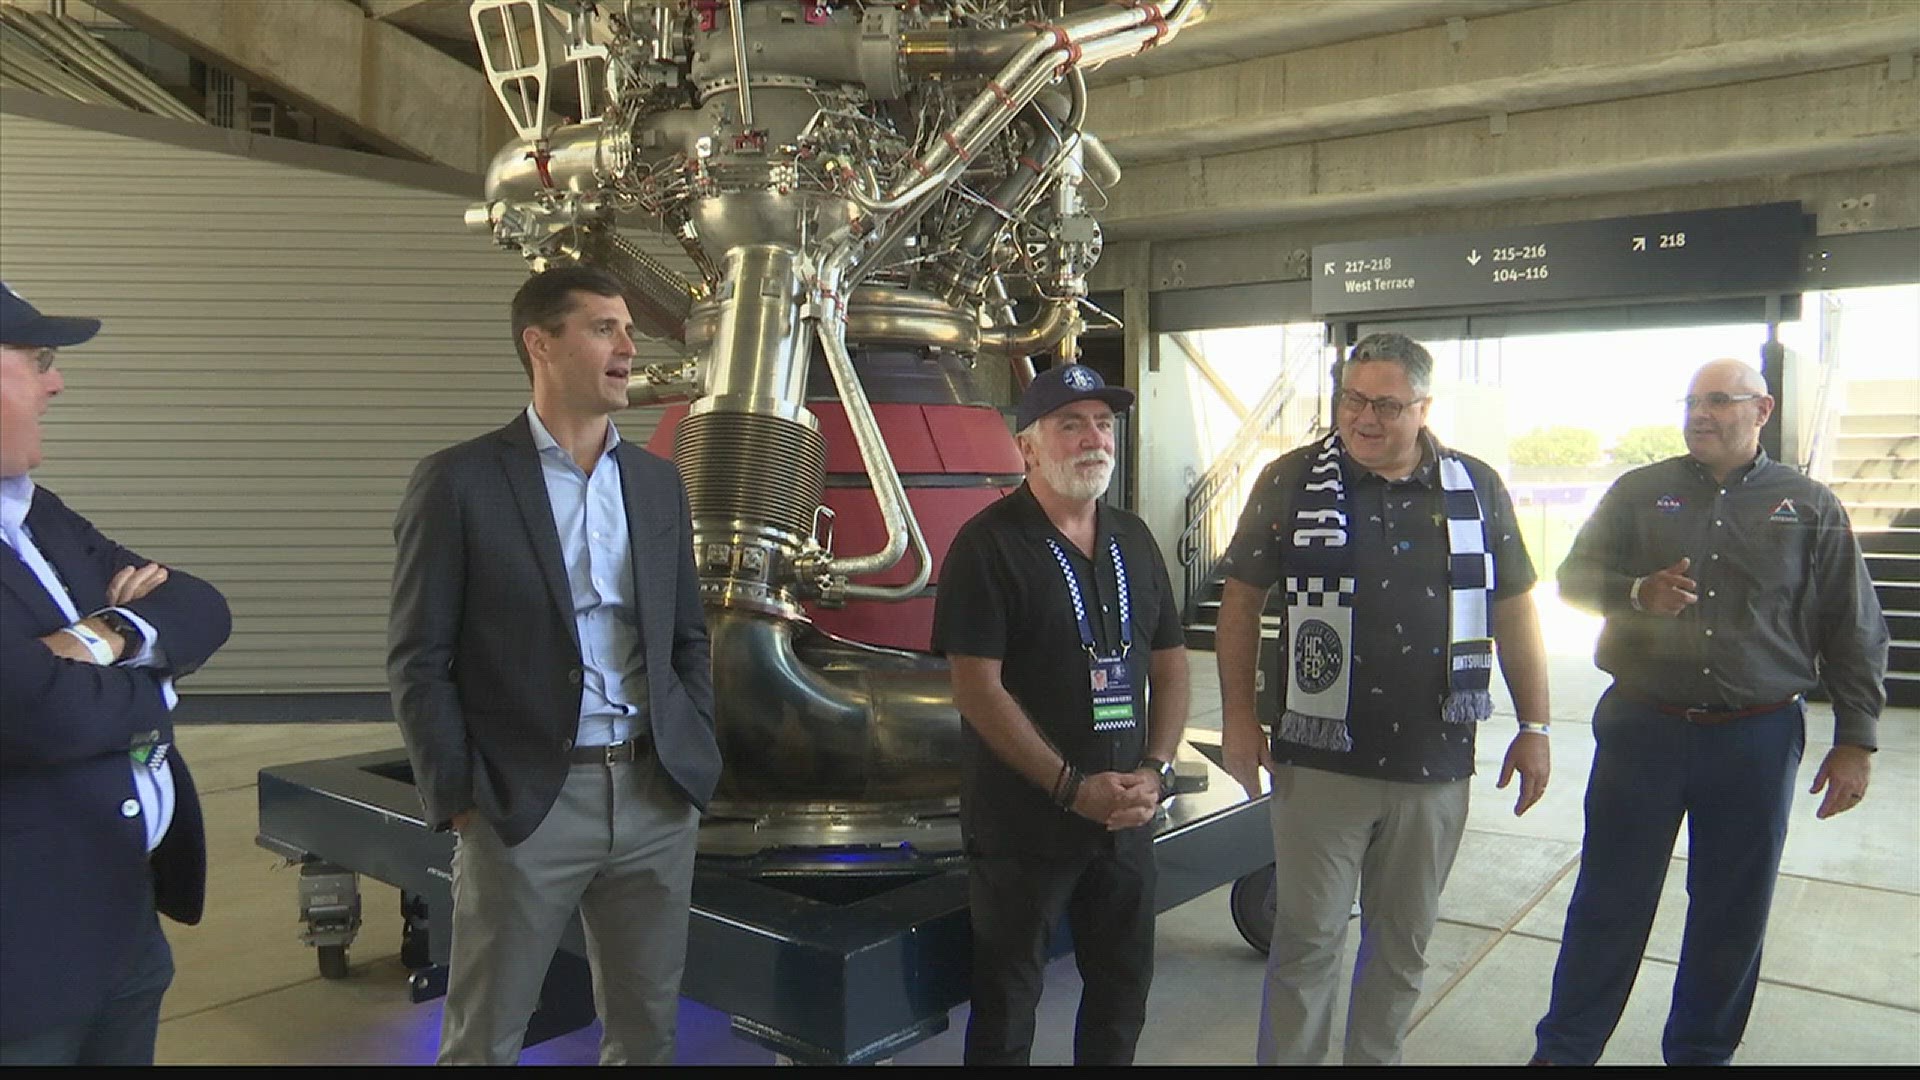 The rocket engine is the first of its kind to be put on long-term display at a professional sports venue.